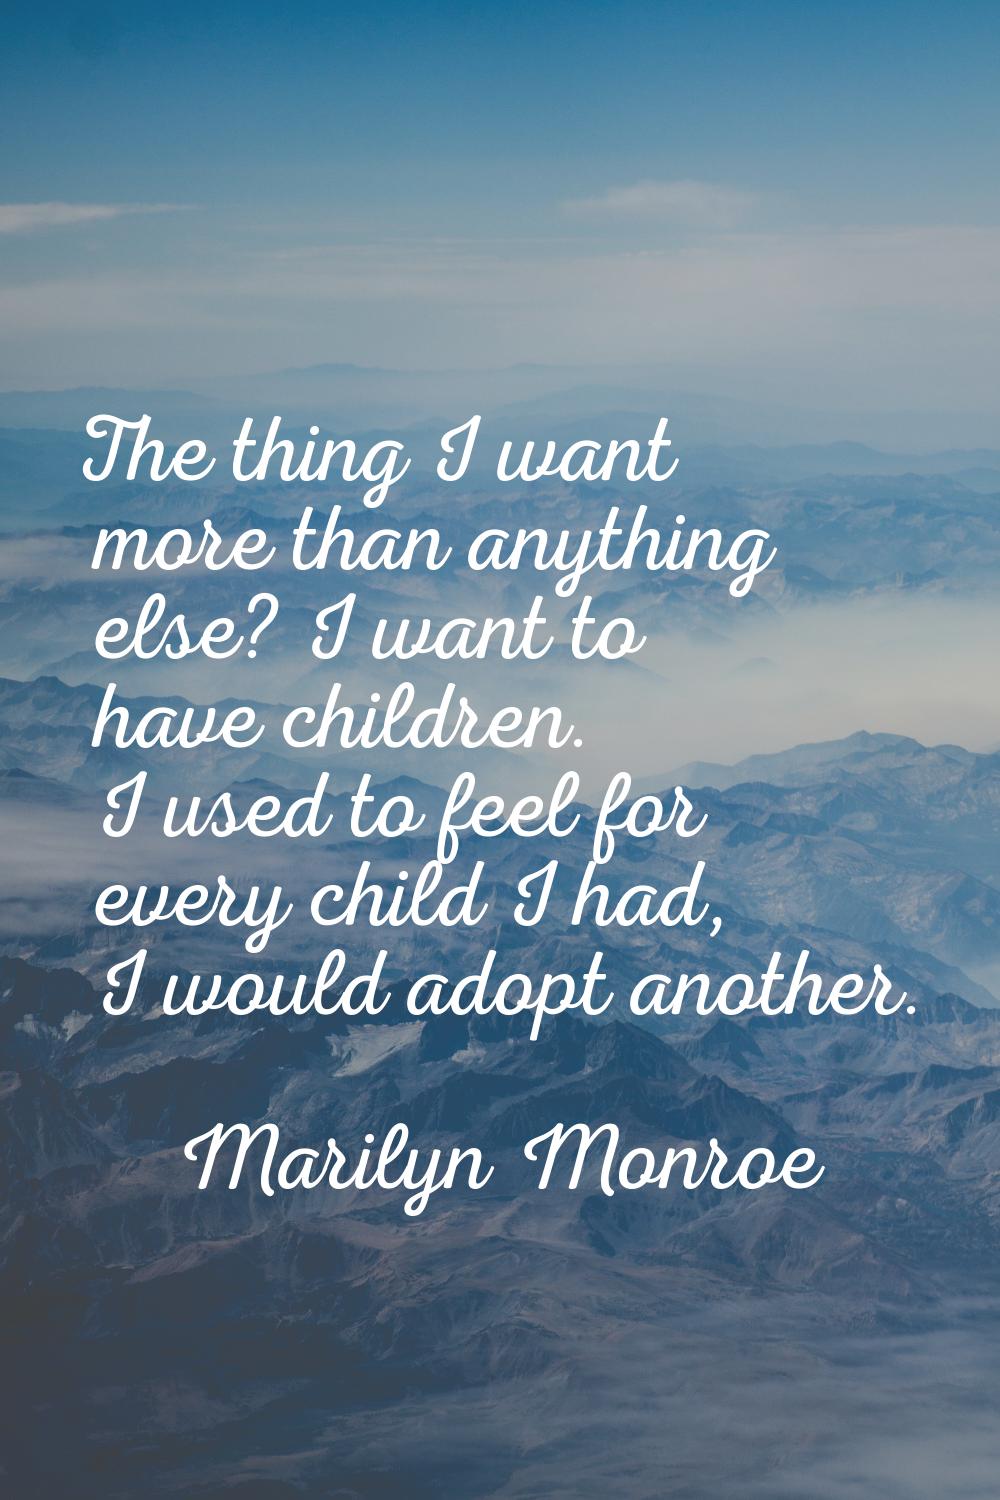 The thing I want more than anything else? I want to have children. I used to feel for every child I